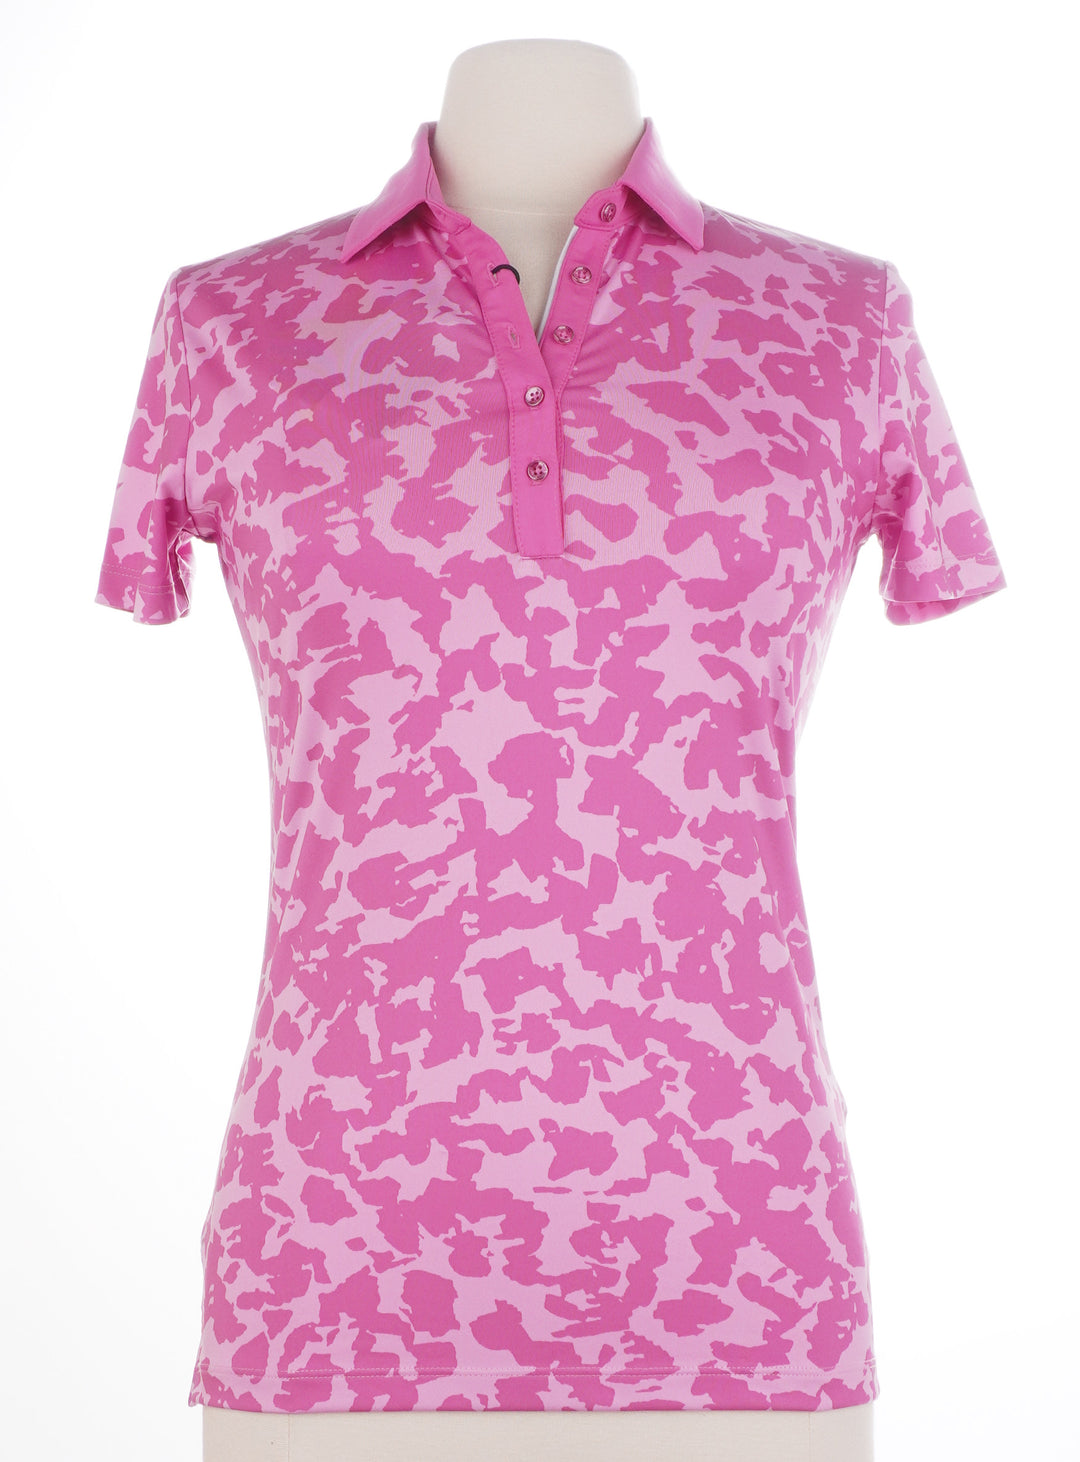 Dunning Golf Stella Jersey Performance Polo - Lily - Size Small - Skorzie